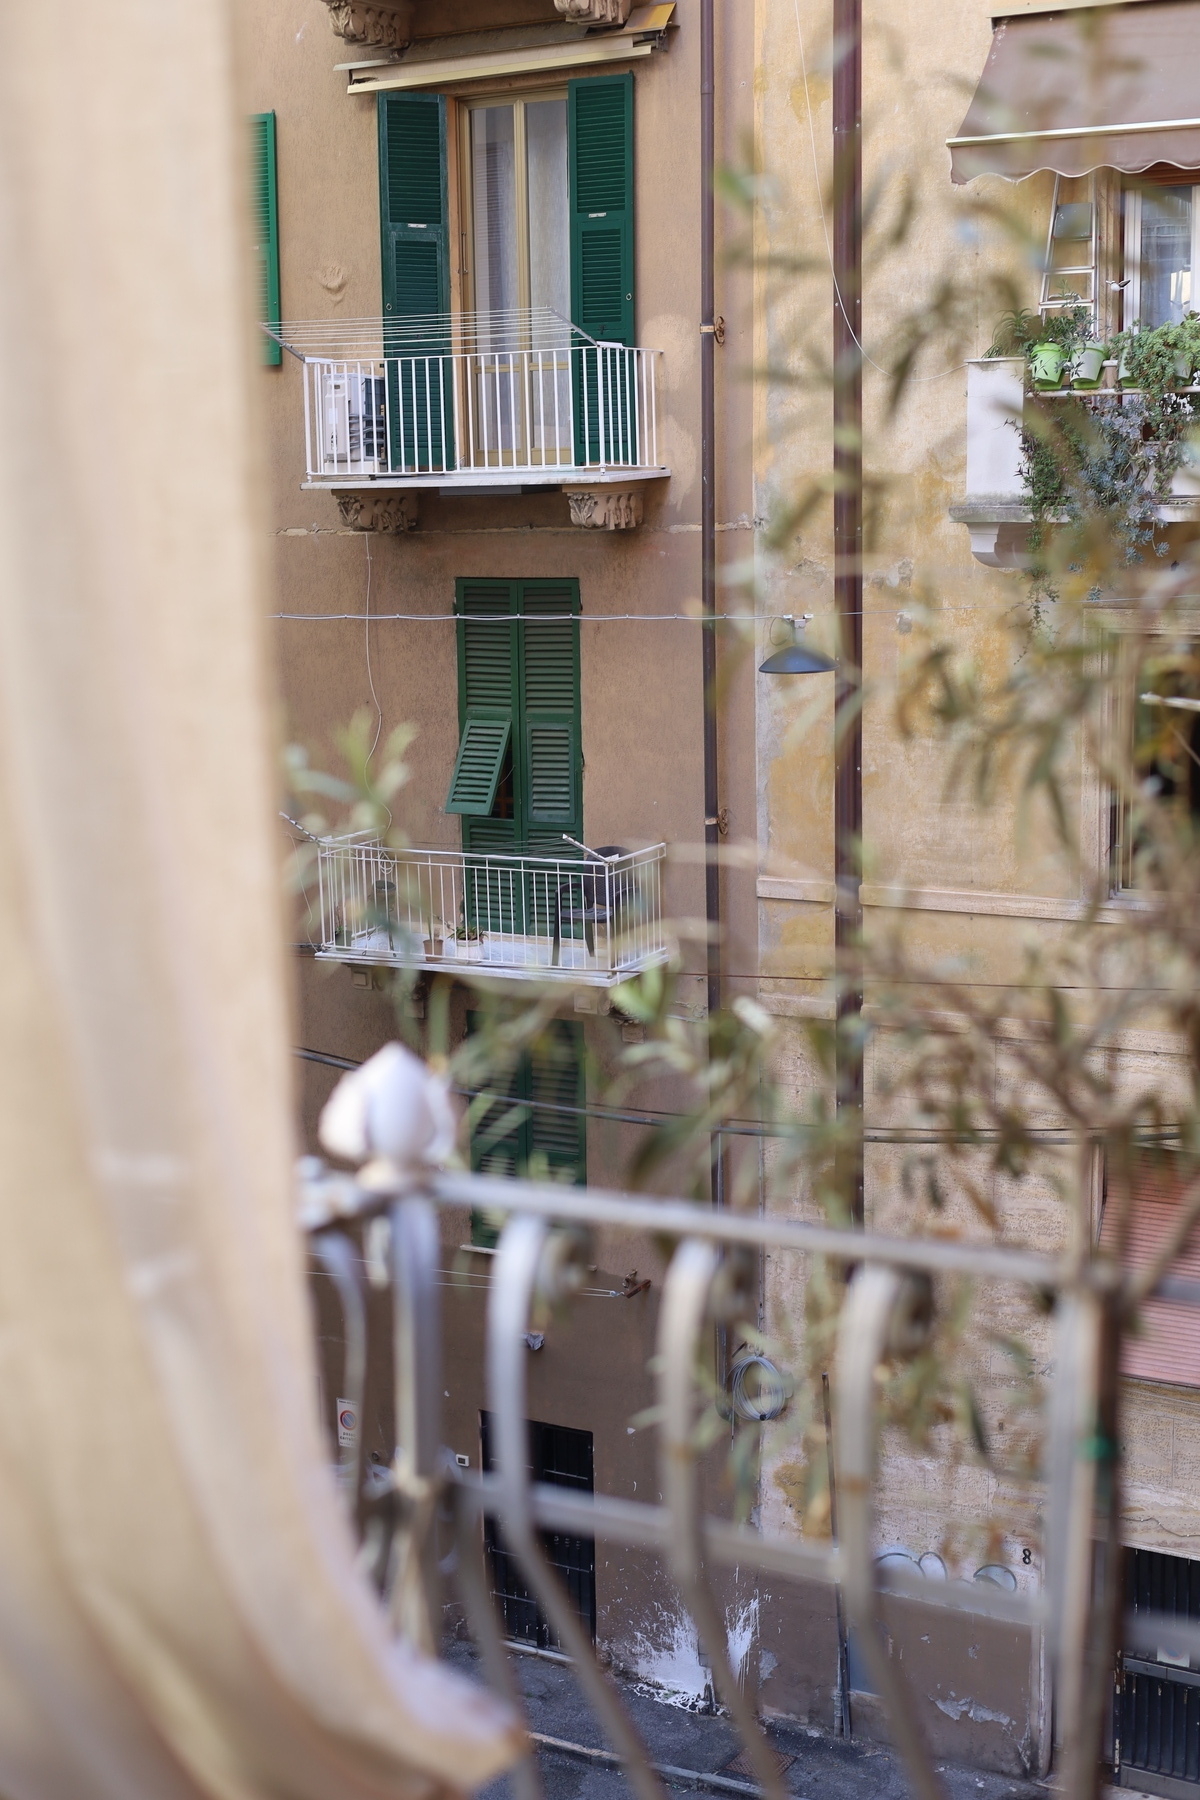 A view of a beige apartment building with green shutters and balconies is seen through a window adorned with a railing and plants.